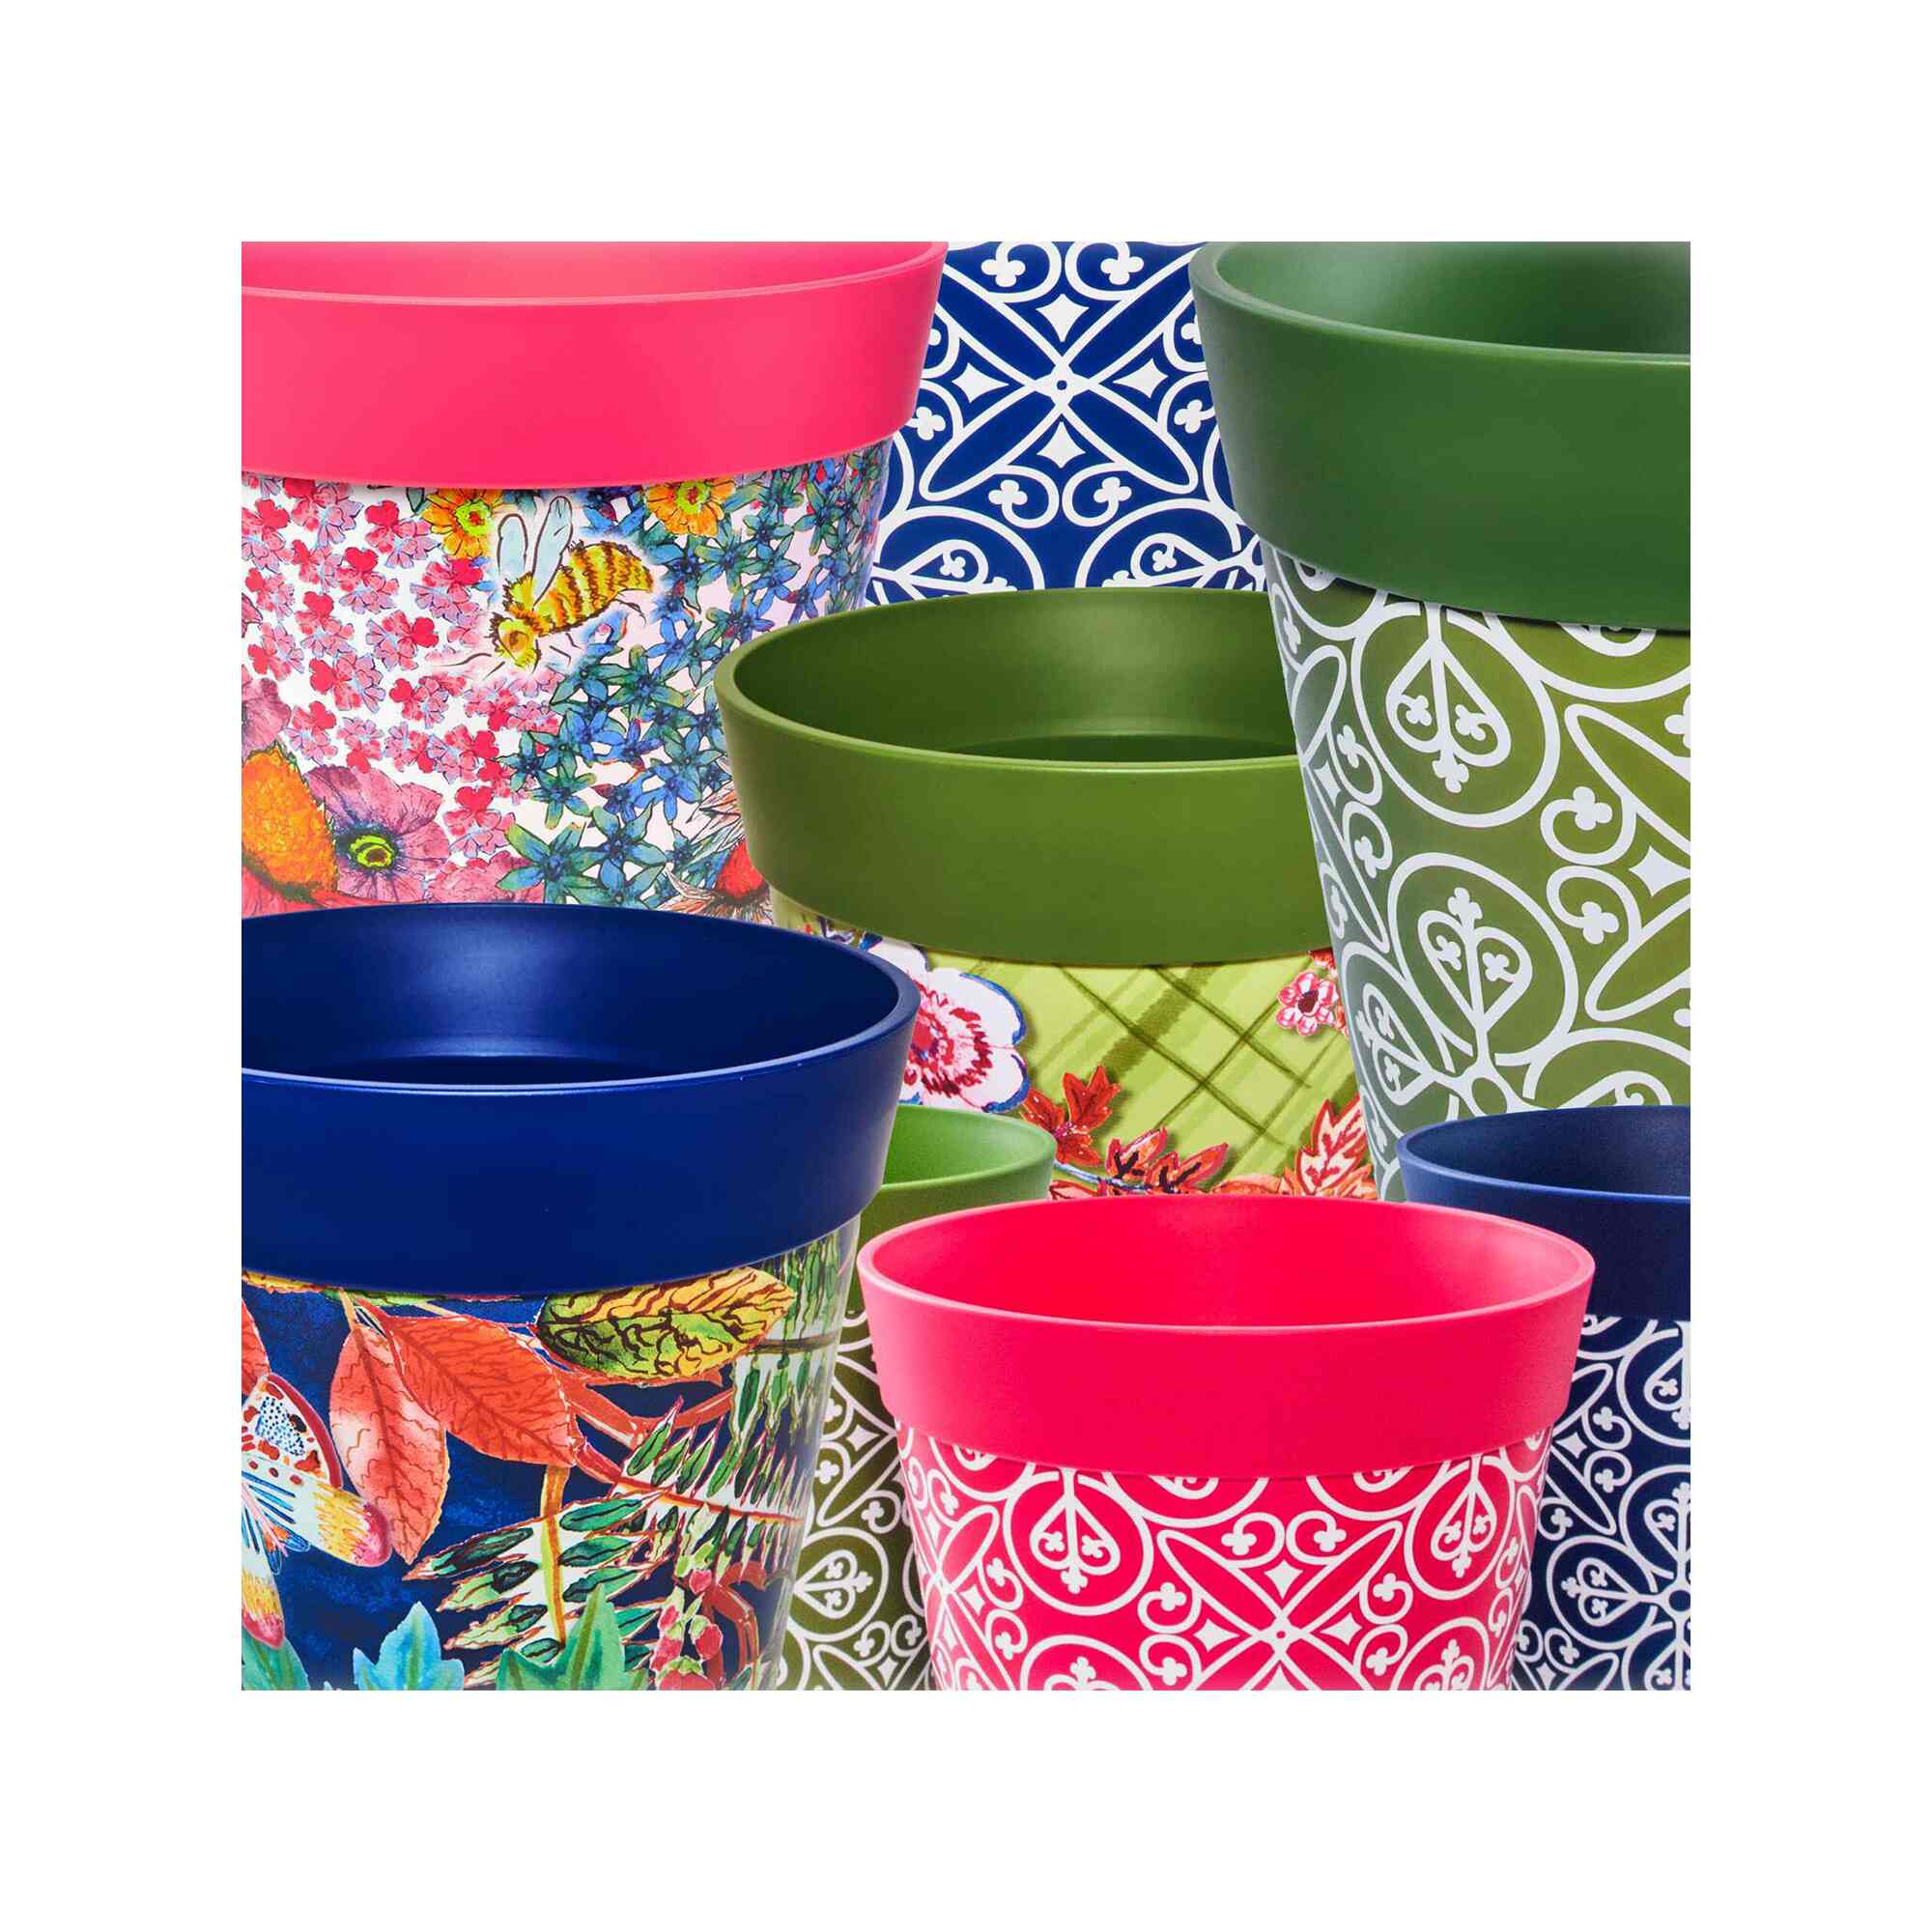 Plastic flowerpots in a mix of different colours